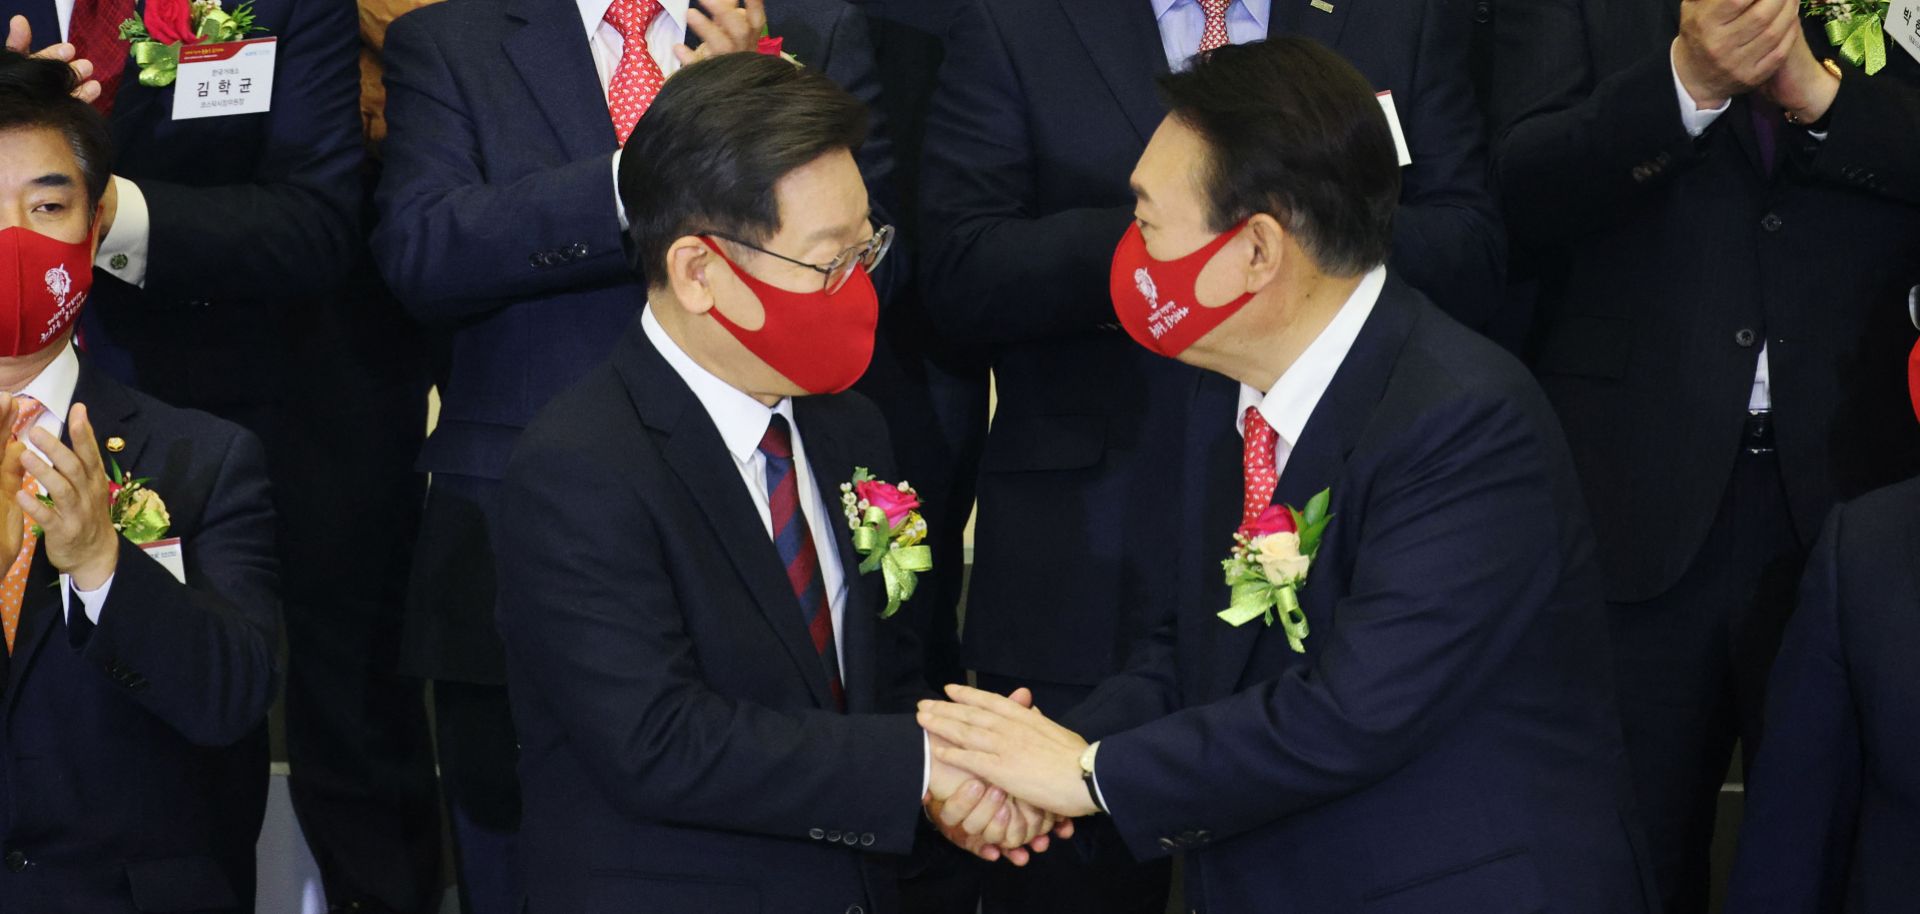 Yoon Suk Yeol (front right), the presidential candidate for South Korea's main opposition party, shakes hands with the ruling party’s candidate, Lee Jae-myung, in Seoul on Jan. 3, 2022. 